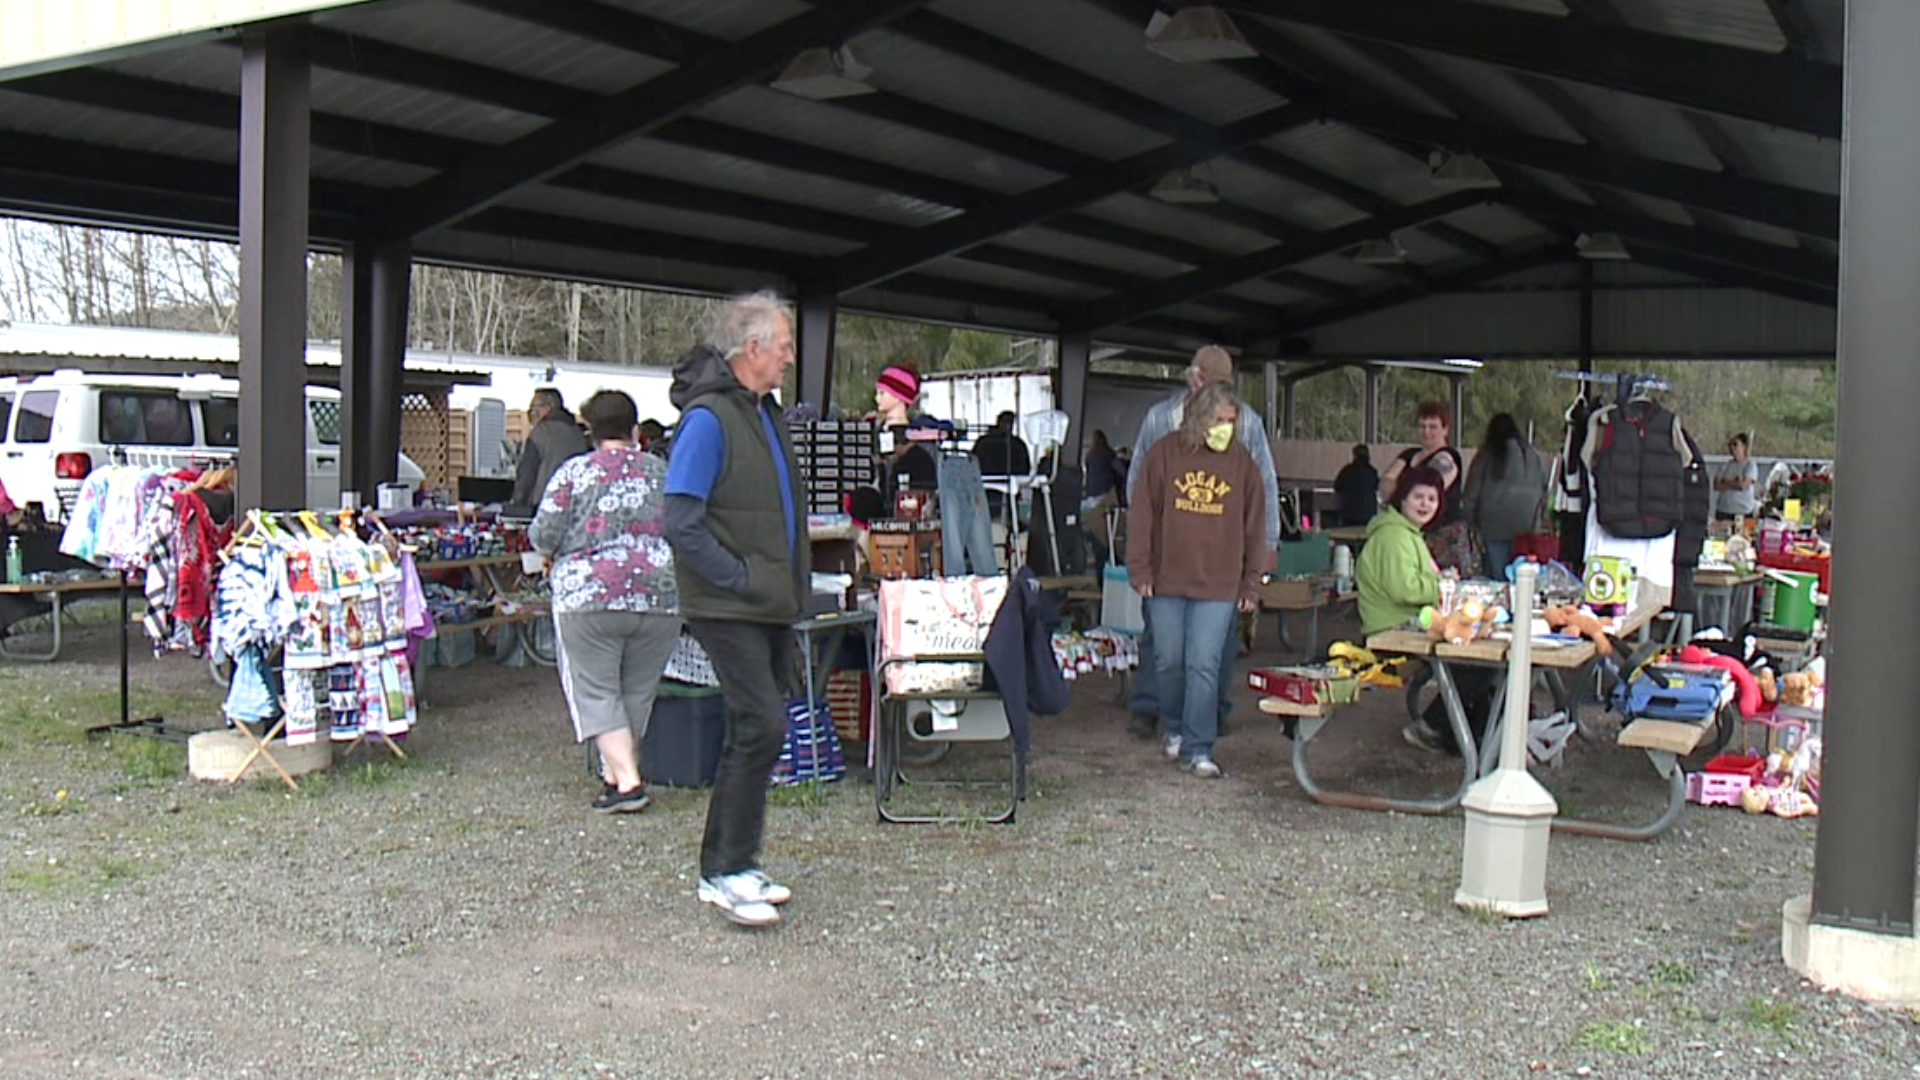 The fire company hosts a flea market monthly from May through September.